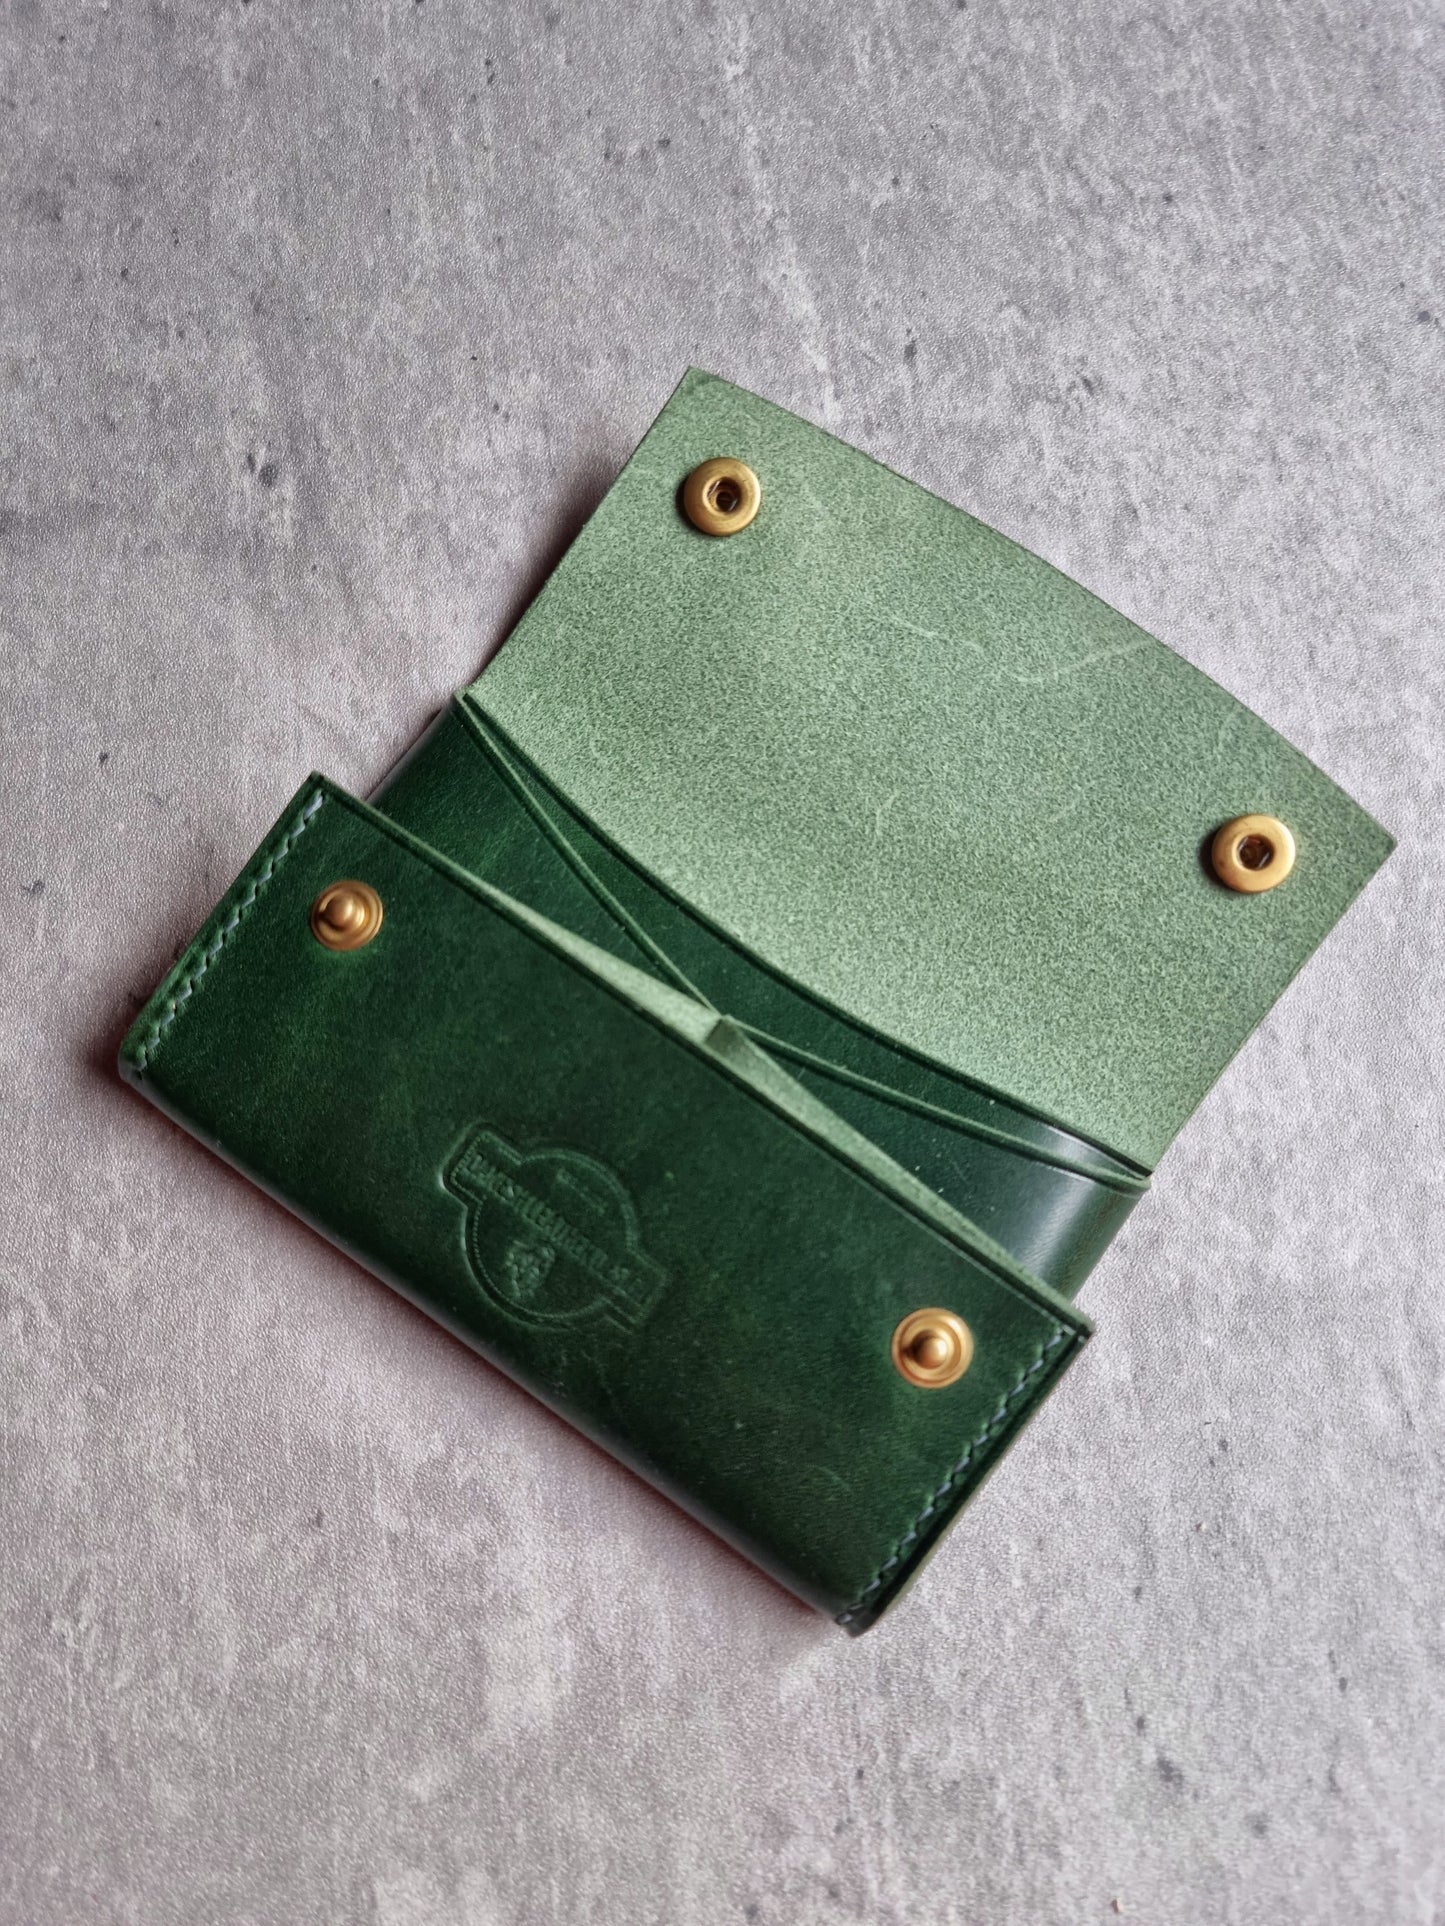 The Frog wallet | DIY | Pattern Pdf | Leather craft template